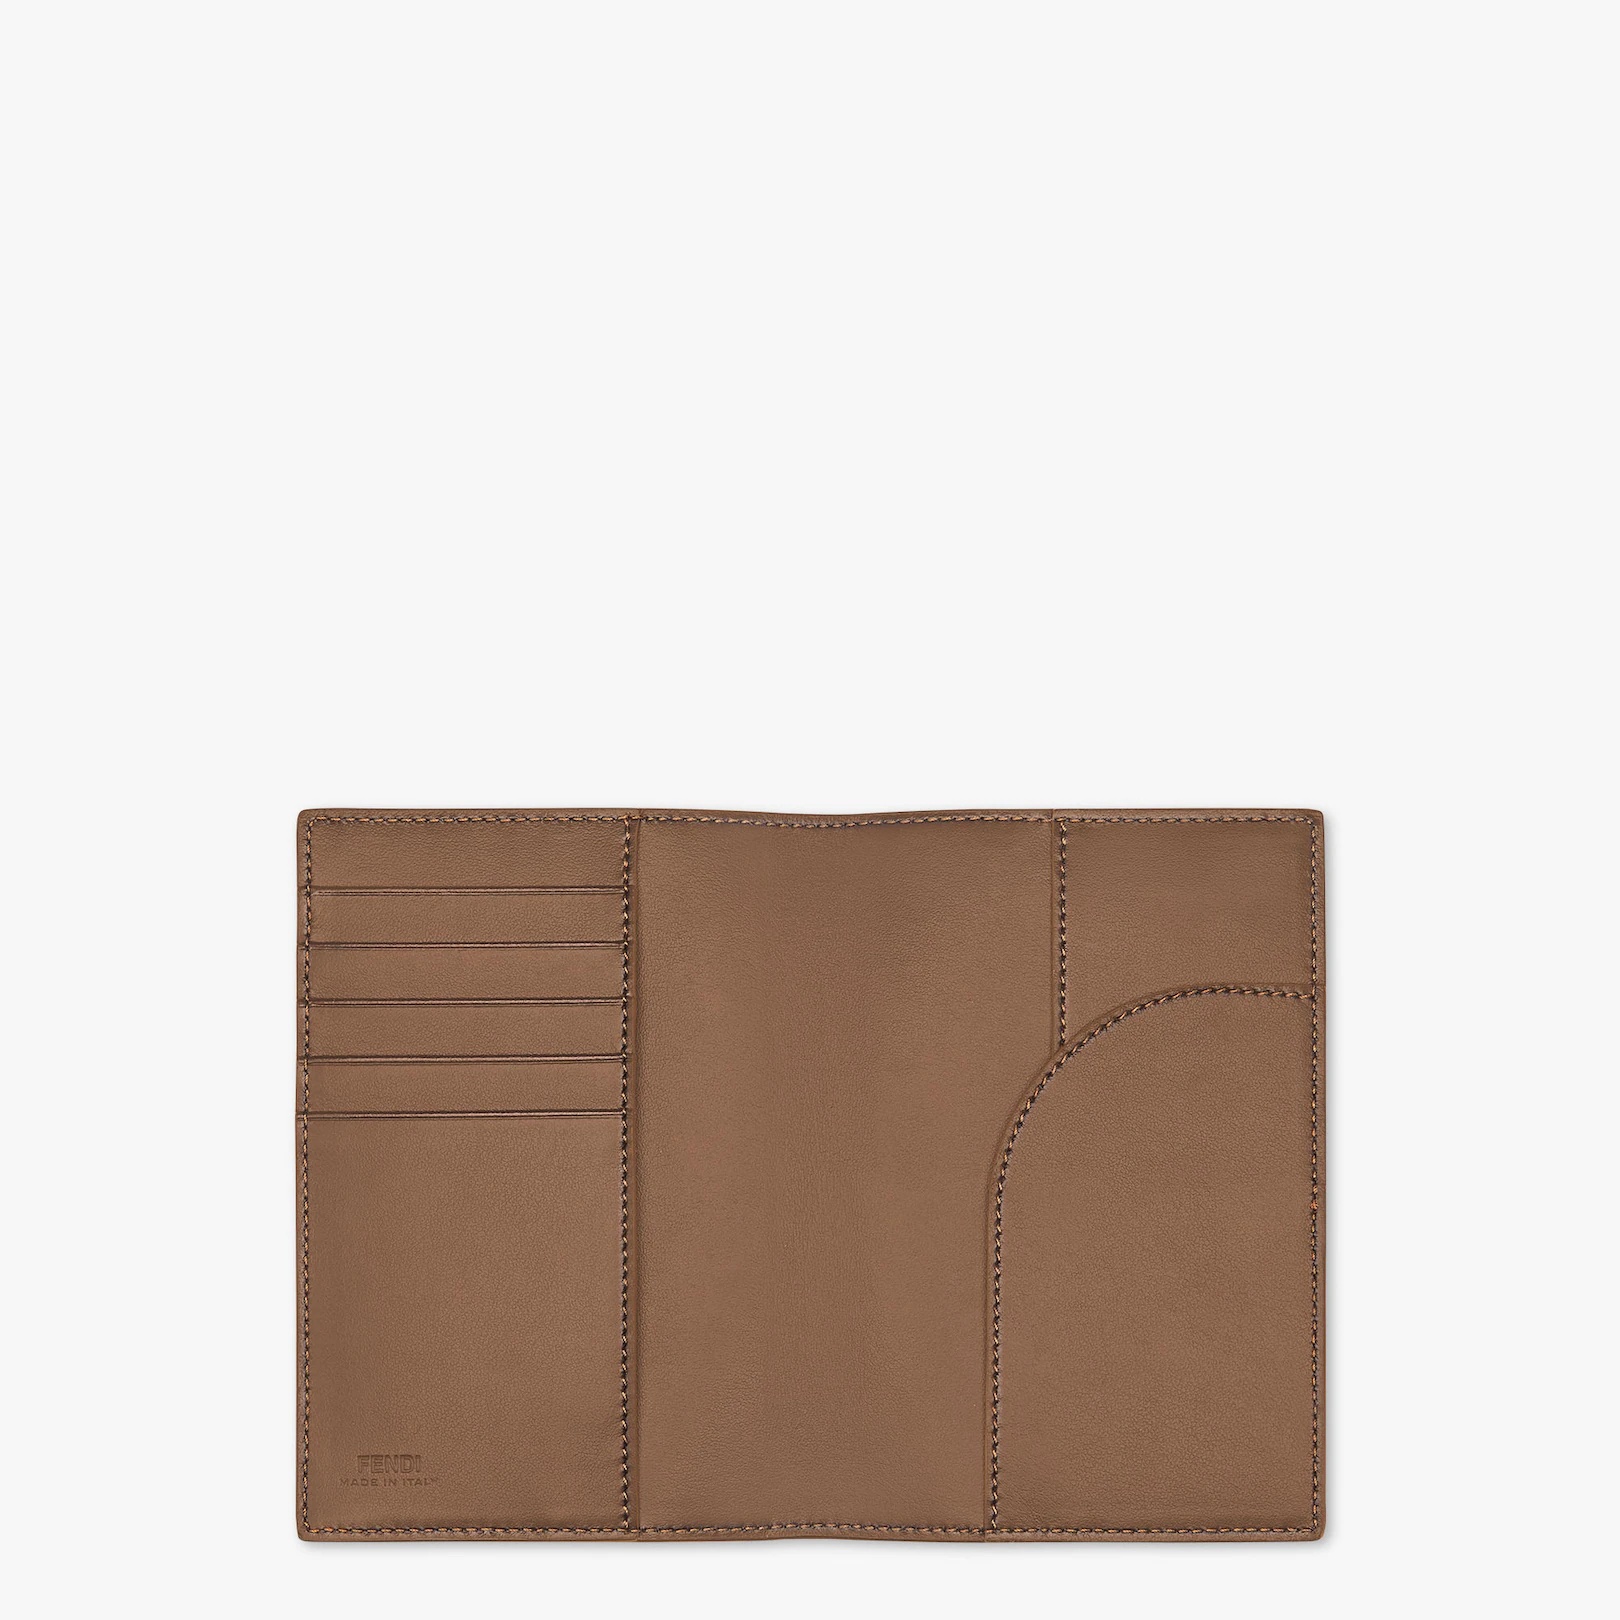 Brown leather passport cover - 3